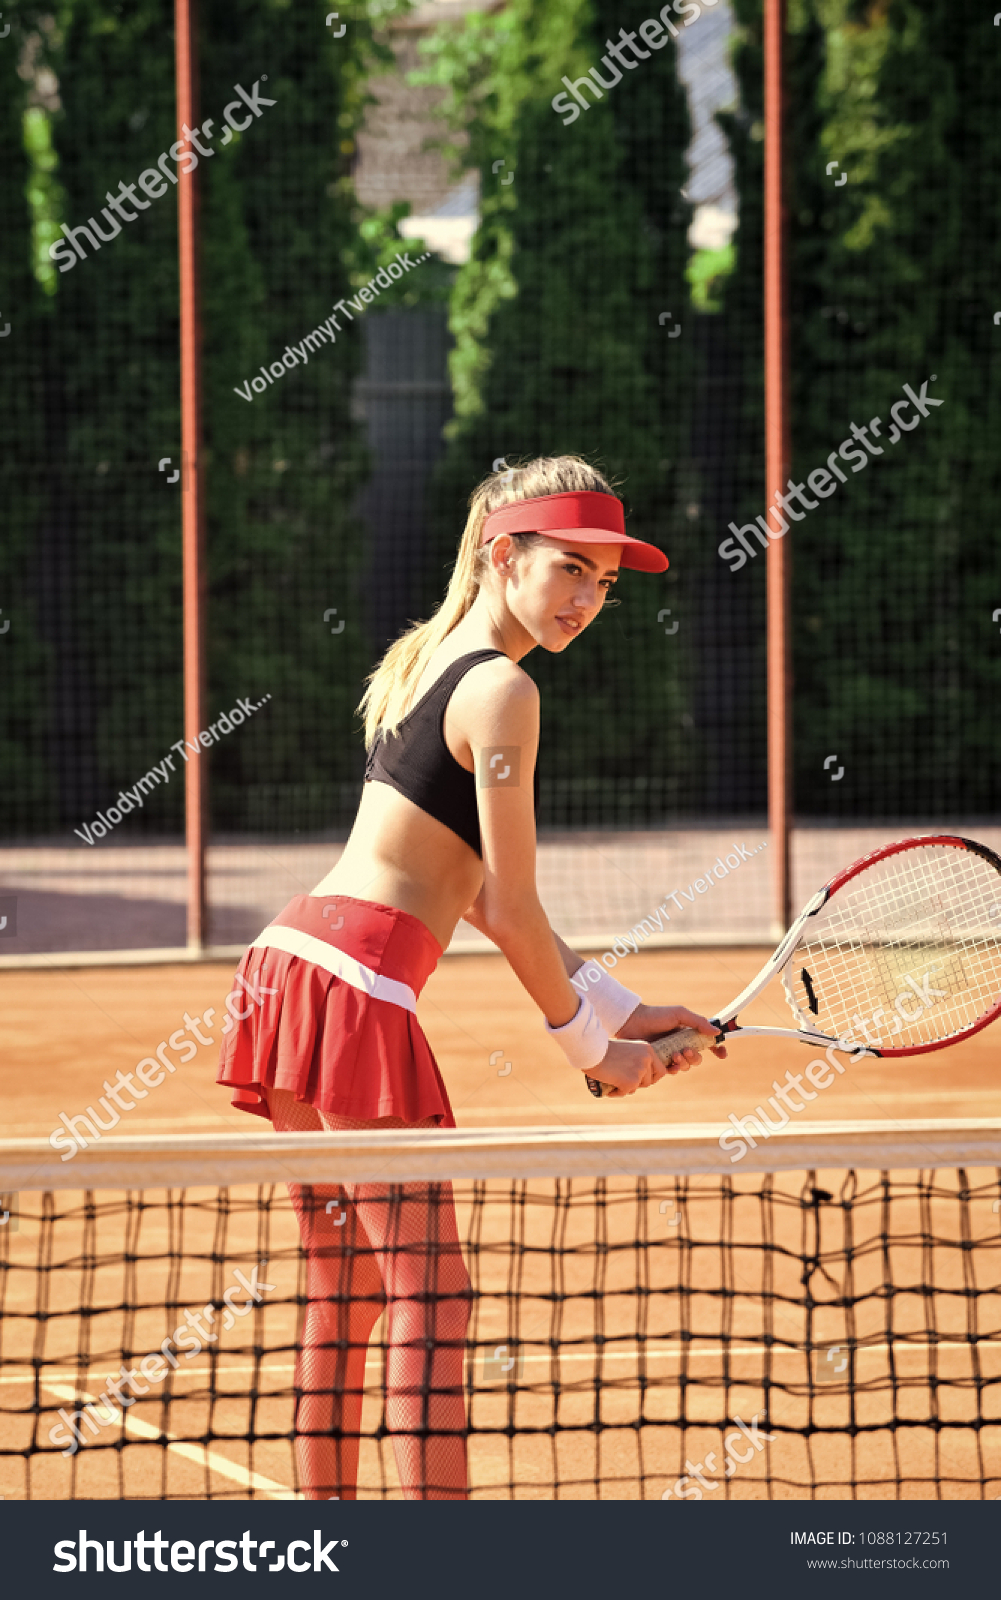 Woman with tennis racket at net on lawn, activity. Sensual woman play tennis on court, sport. Activity, energy, power. Sport, training, workout. Wellness, bodycare, health. #1088127251